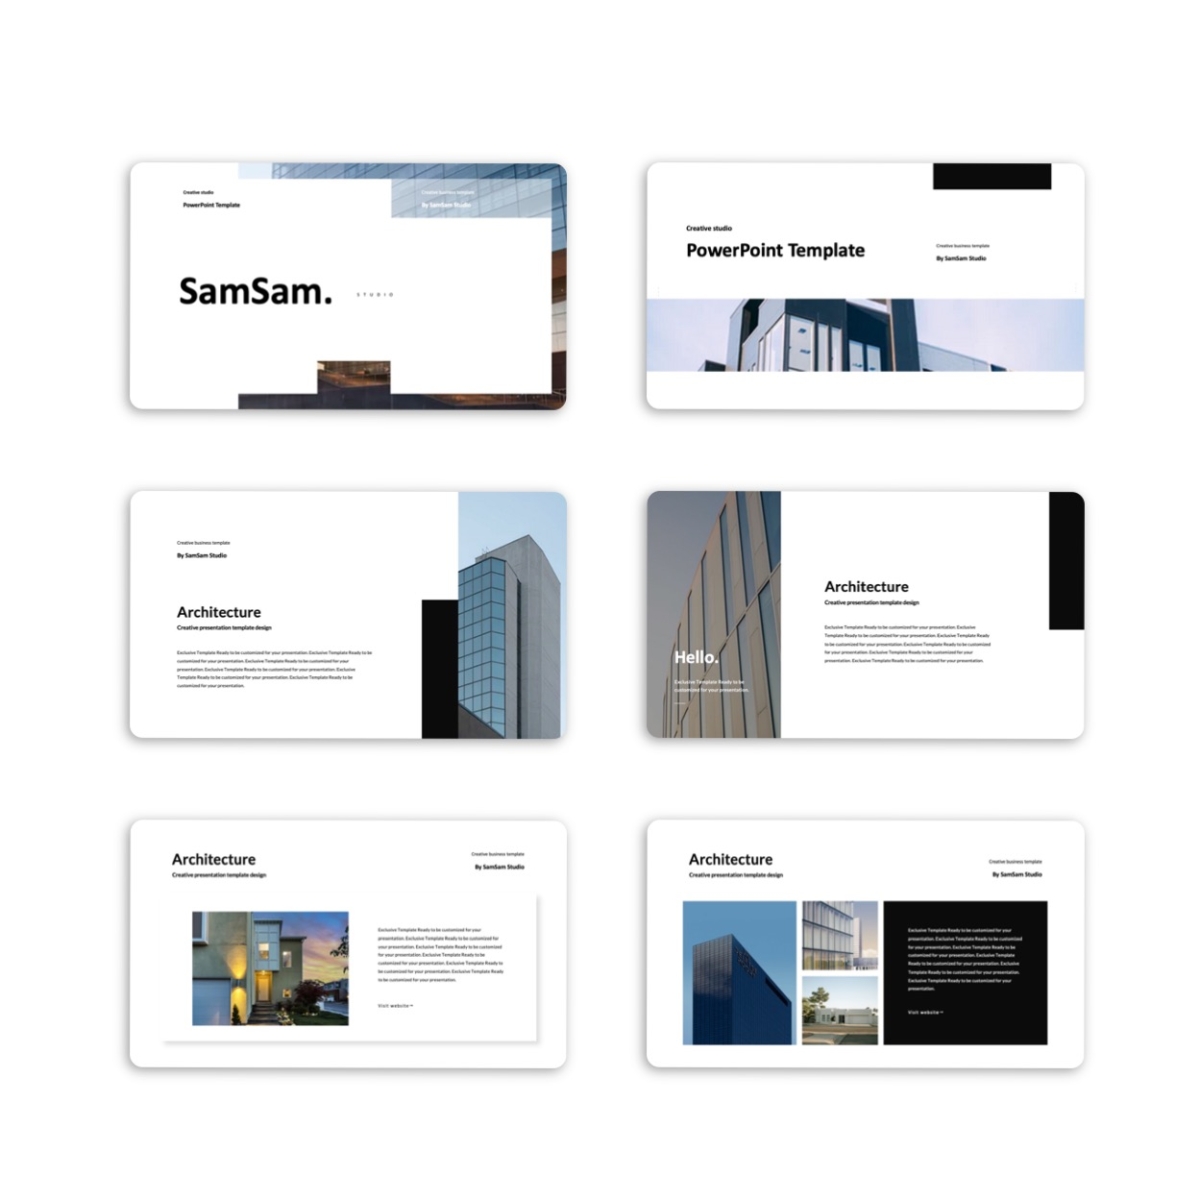 Architecture Hotel Project Proposal PowerPoint Template